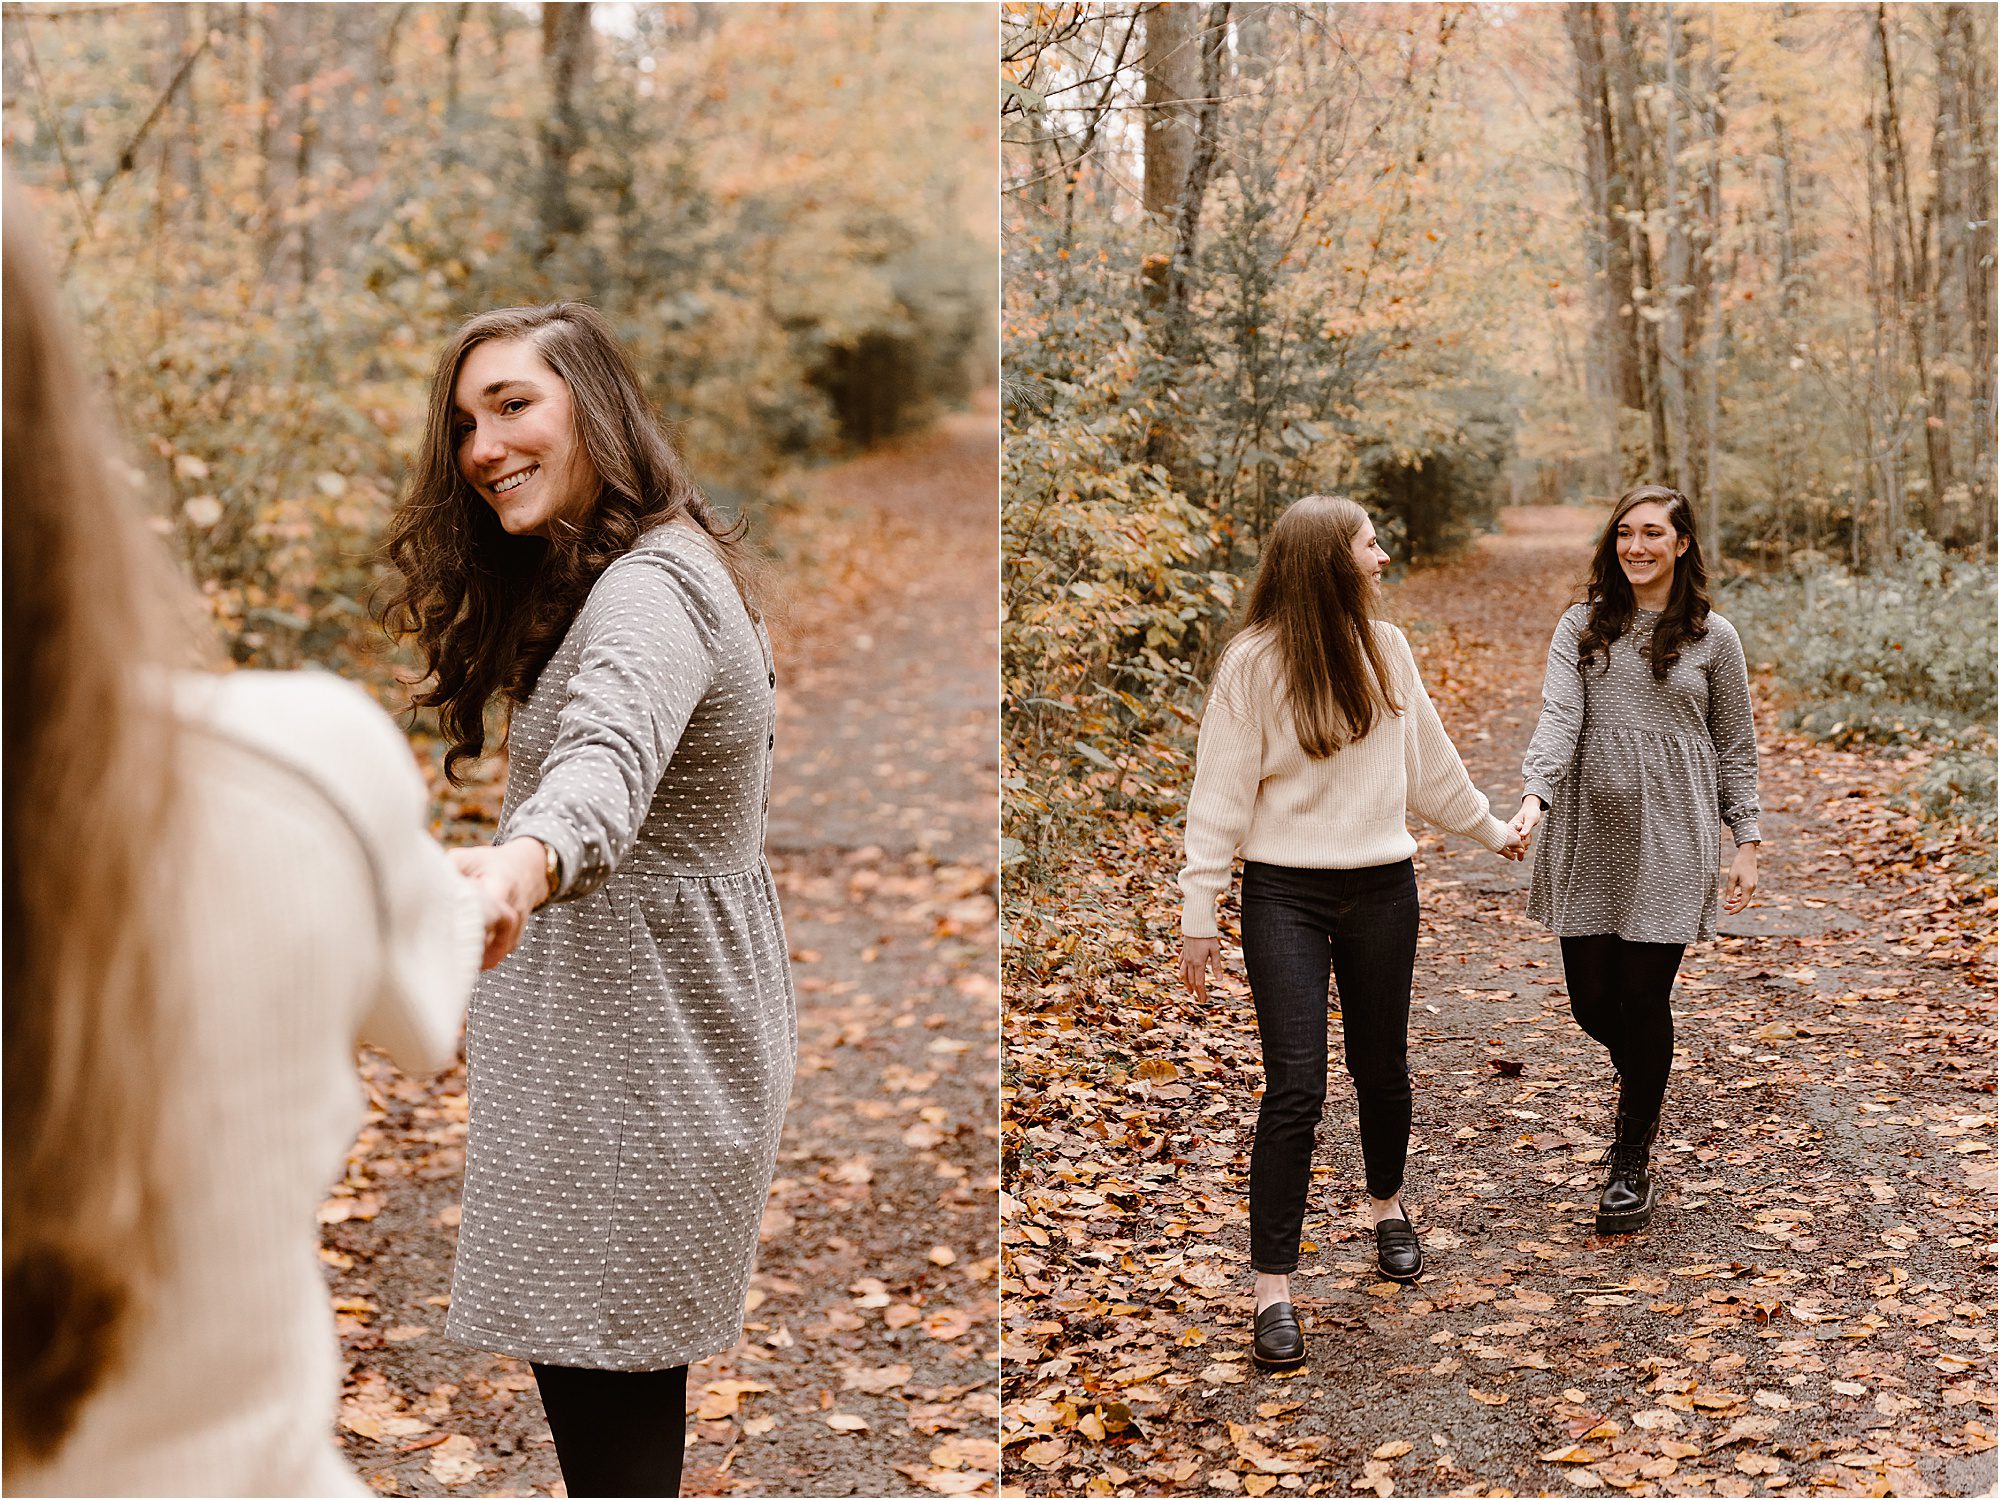 two women laughing and walking on trail in woods during the Fall season